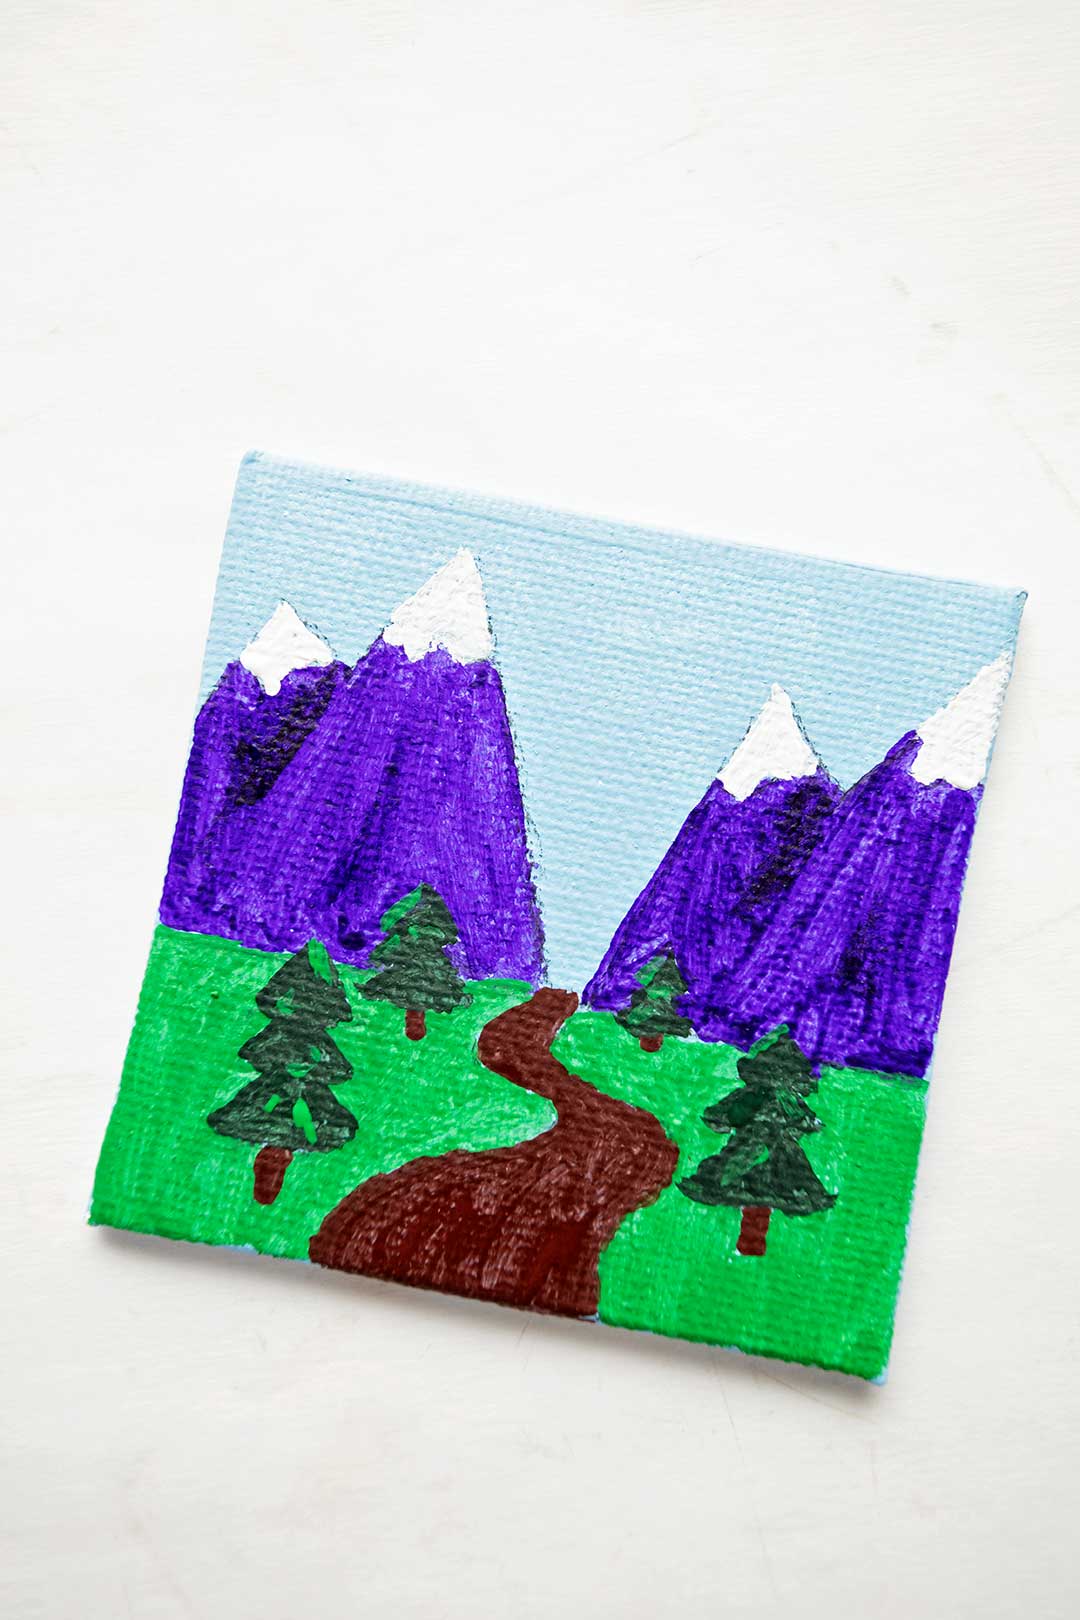 Mini canvas paintings I made with acrylic paint : r/painting